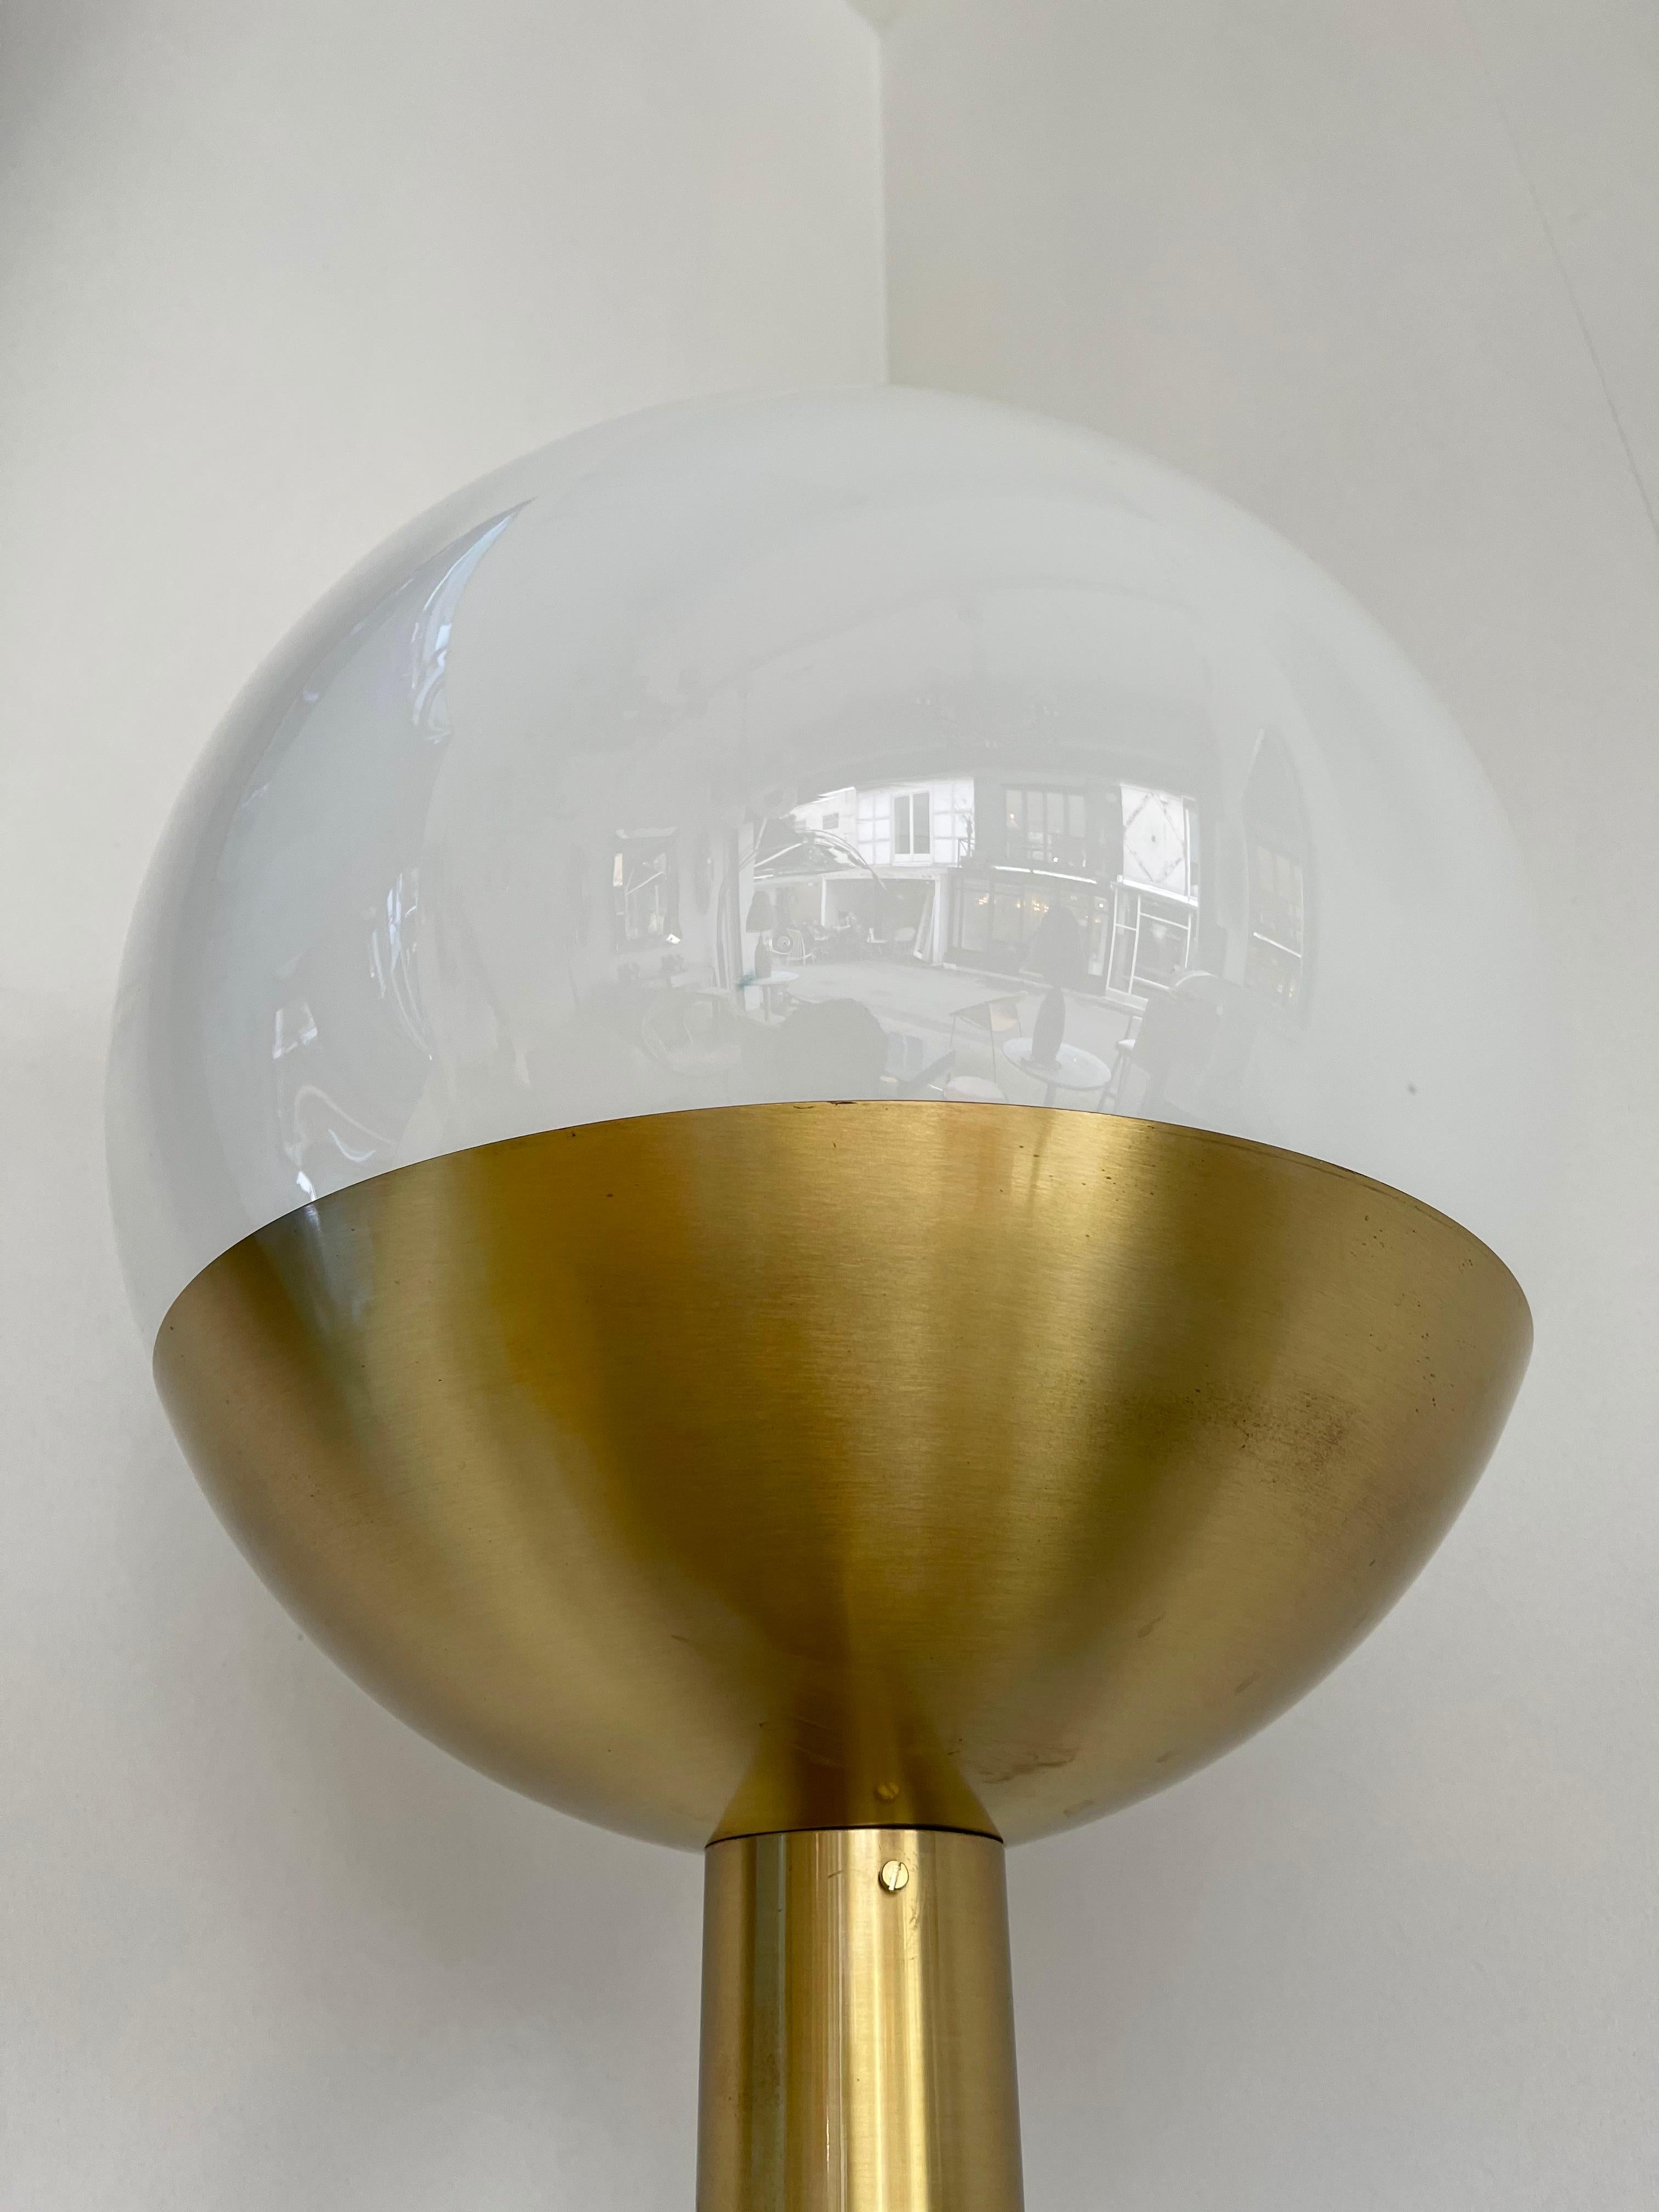 Space Age Brass and Glass Floor Lamp P428 by Pia Guidetti Crippa for Luci, Italy, 1970s